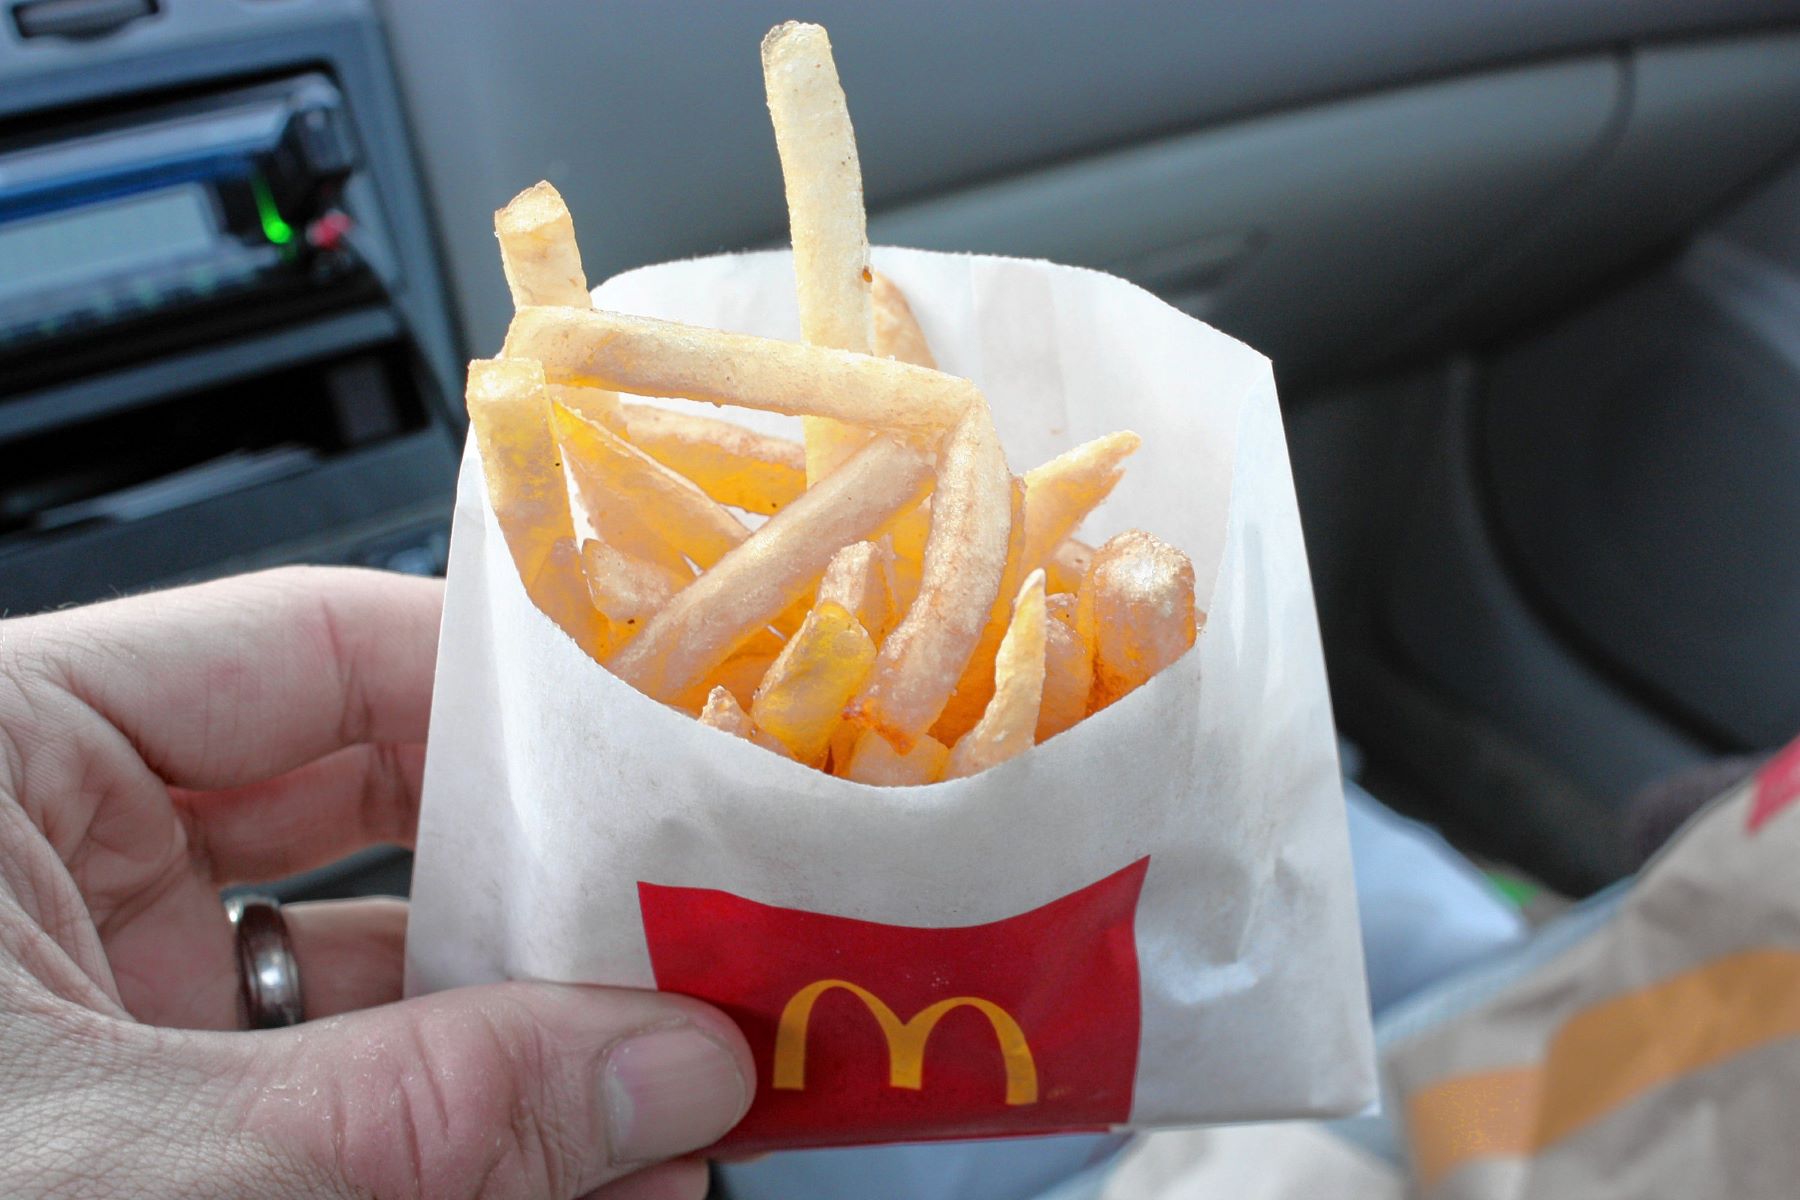 10-mcdonalds-small-fry-nutrition-facts